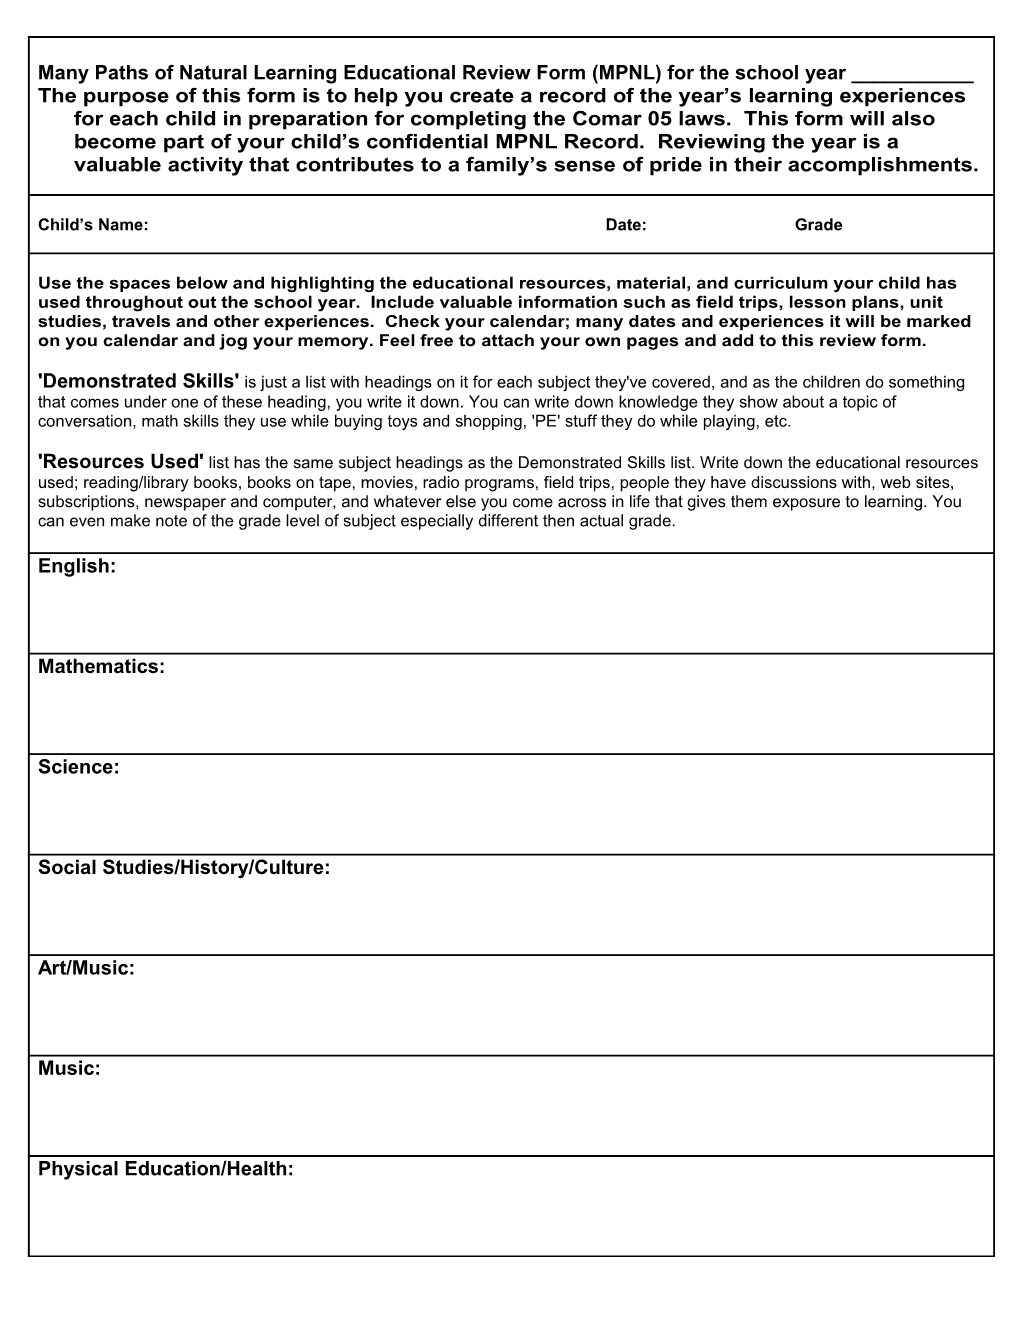 Many Paths of Natural Learning Educational Review Form